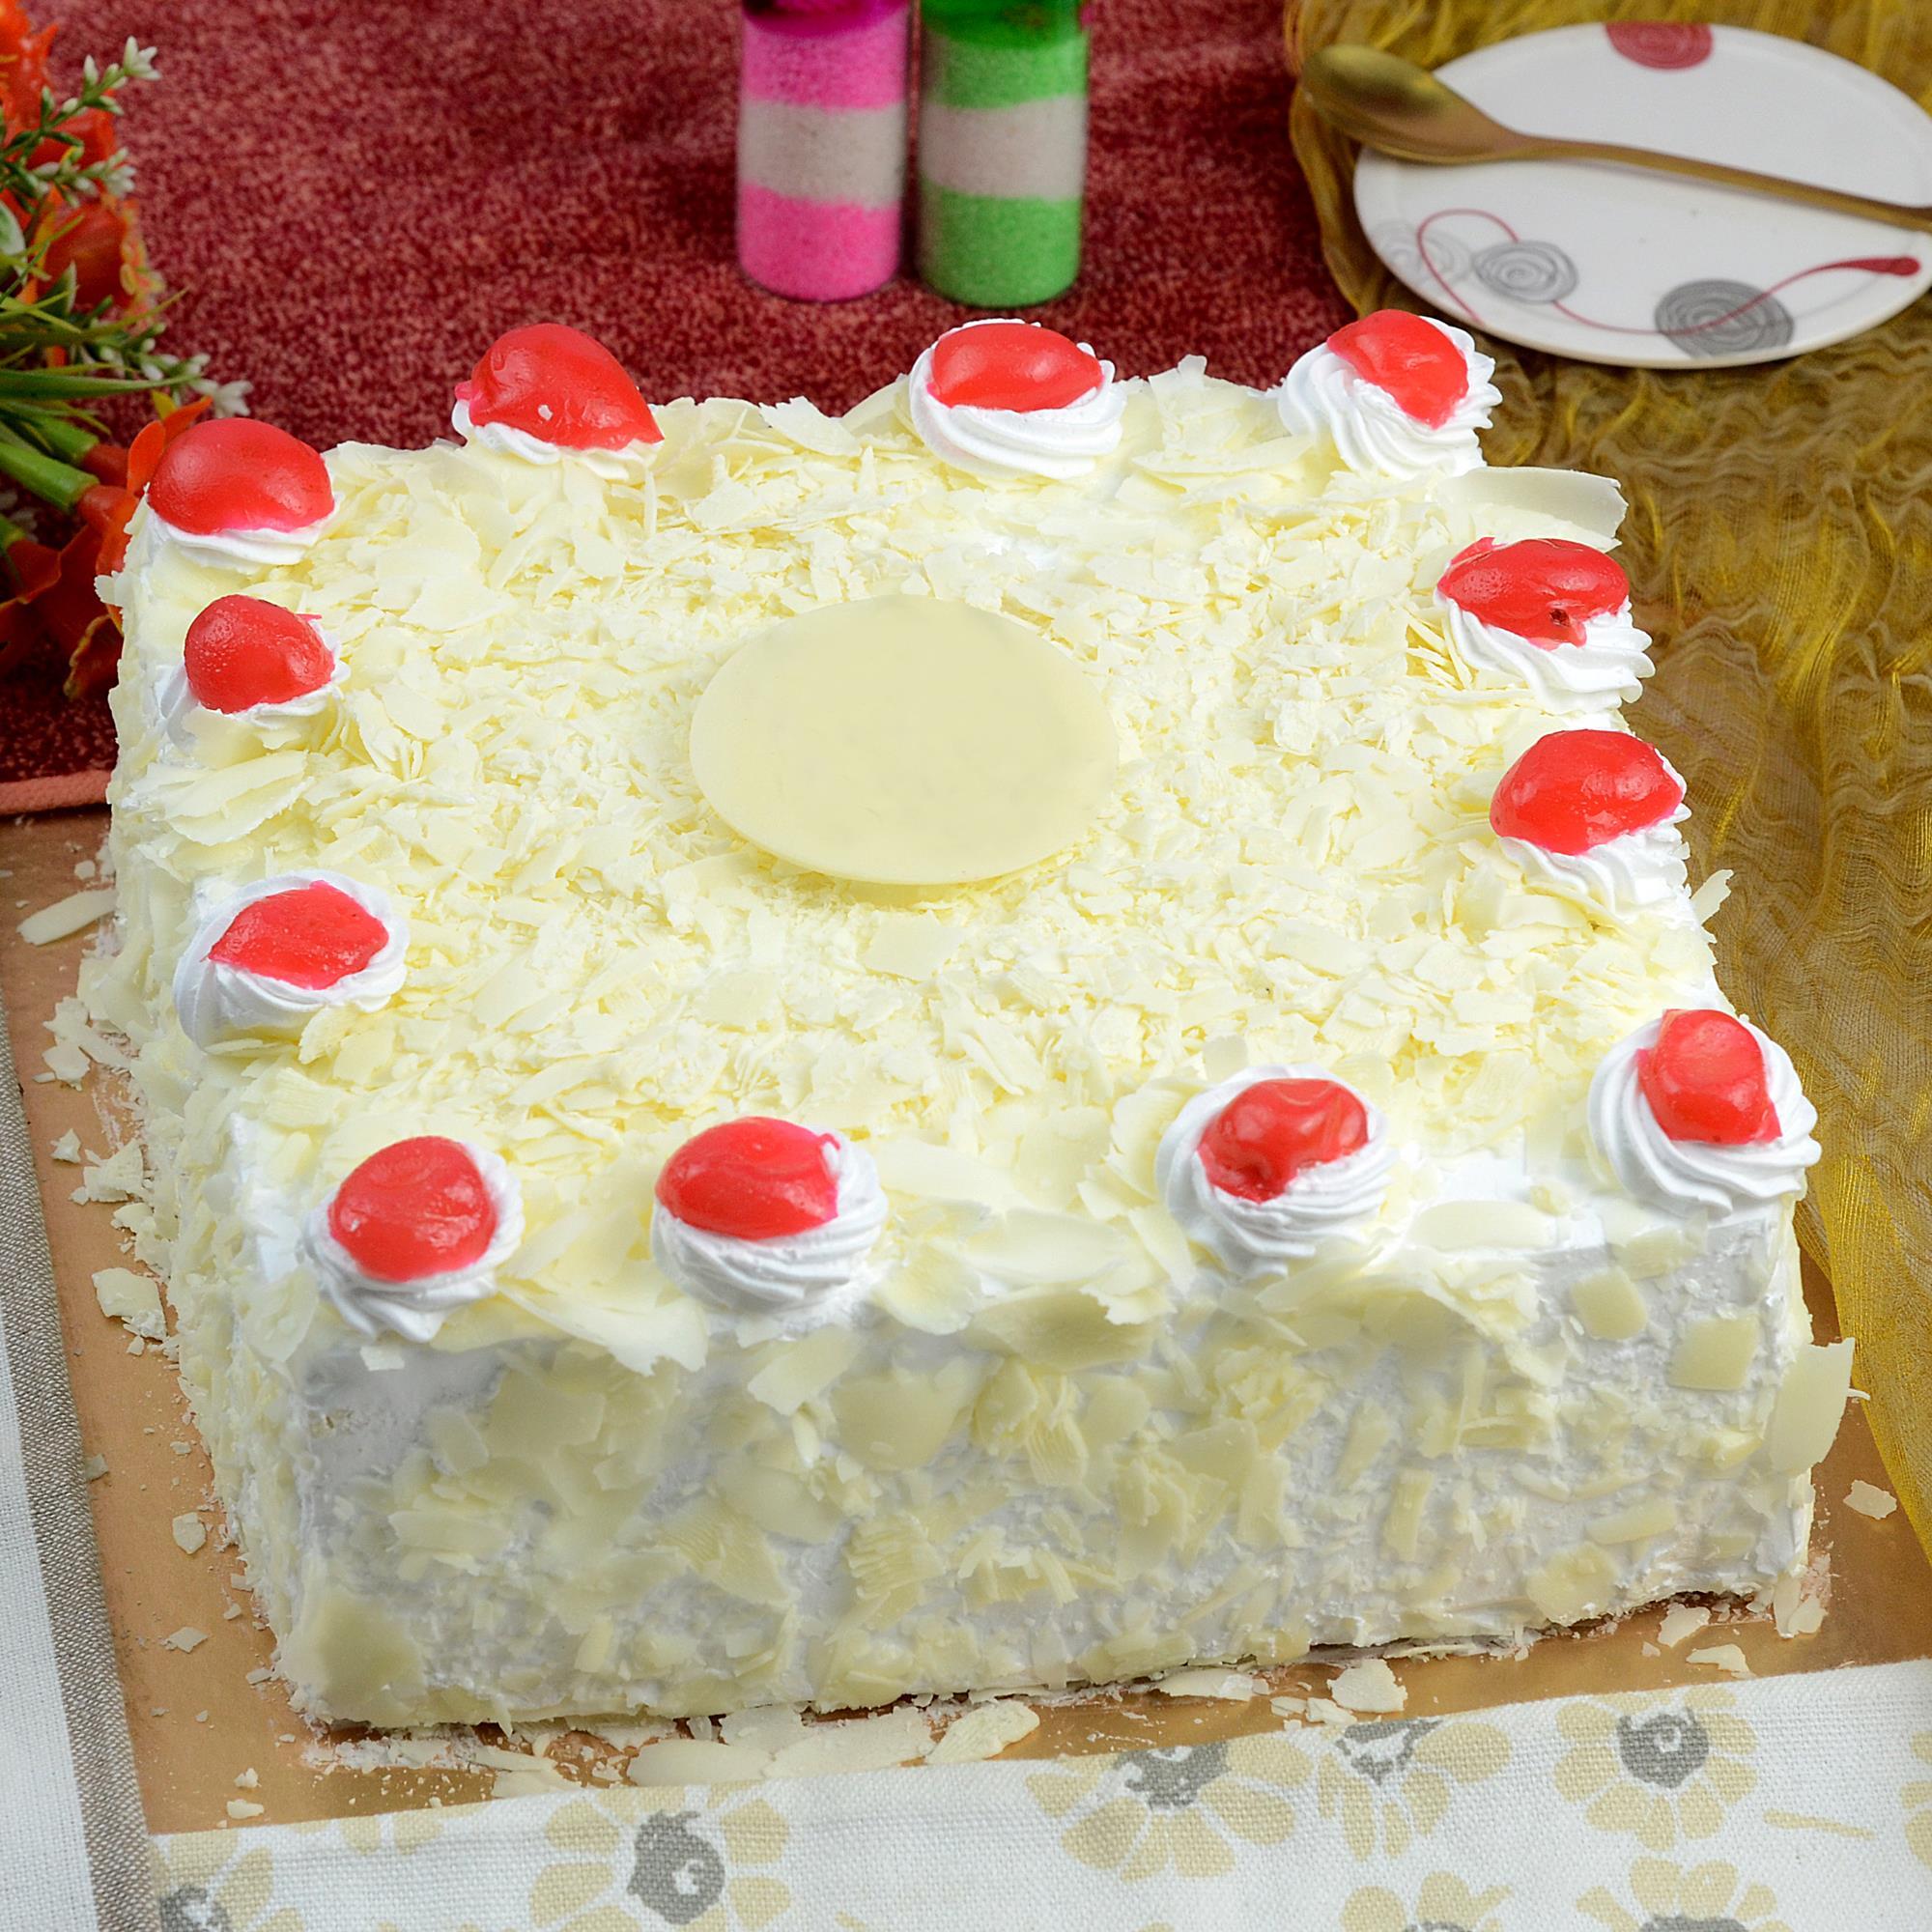 Get Deals and Offers at Cake Square, Tambaram West, Chennai | Dineout